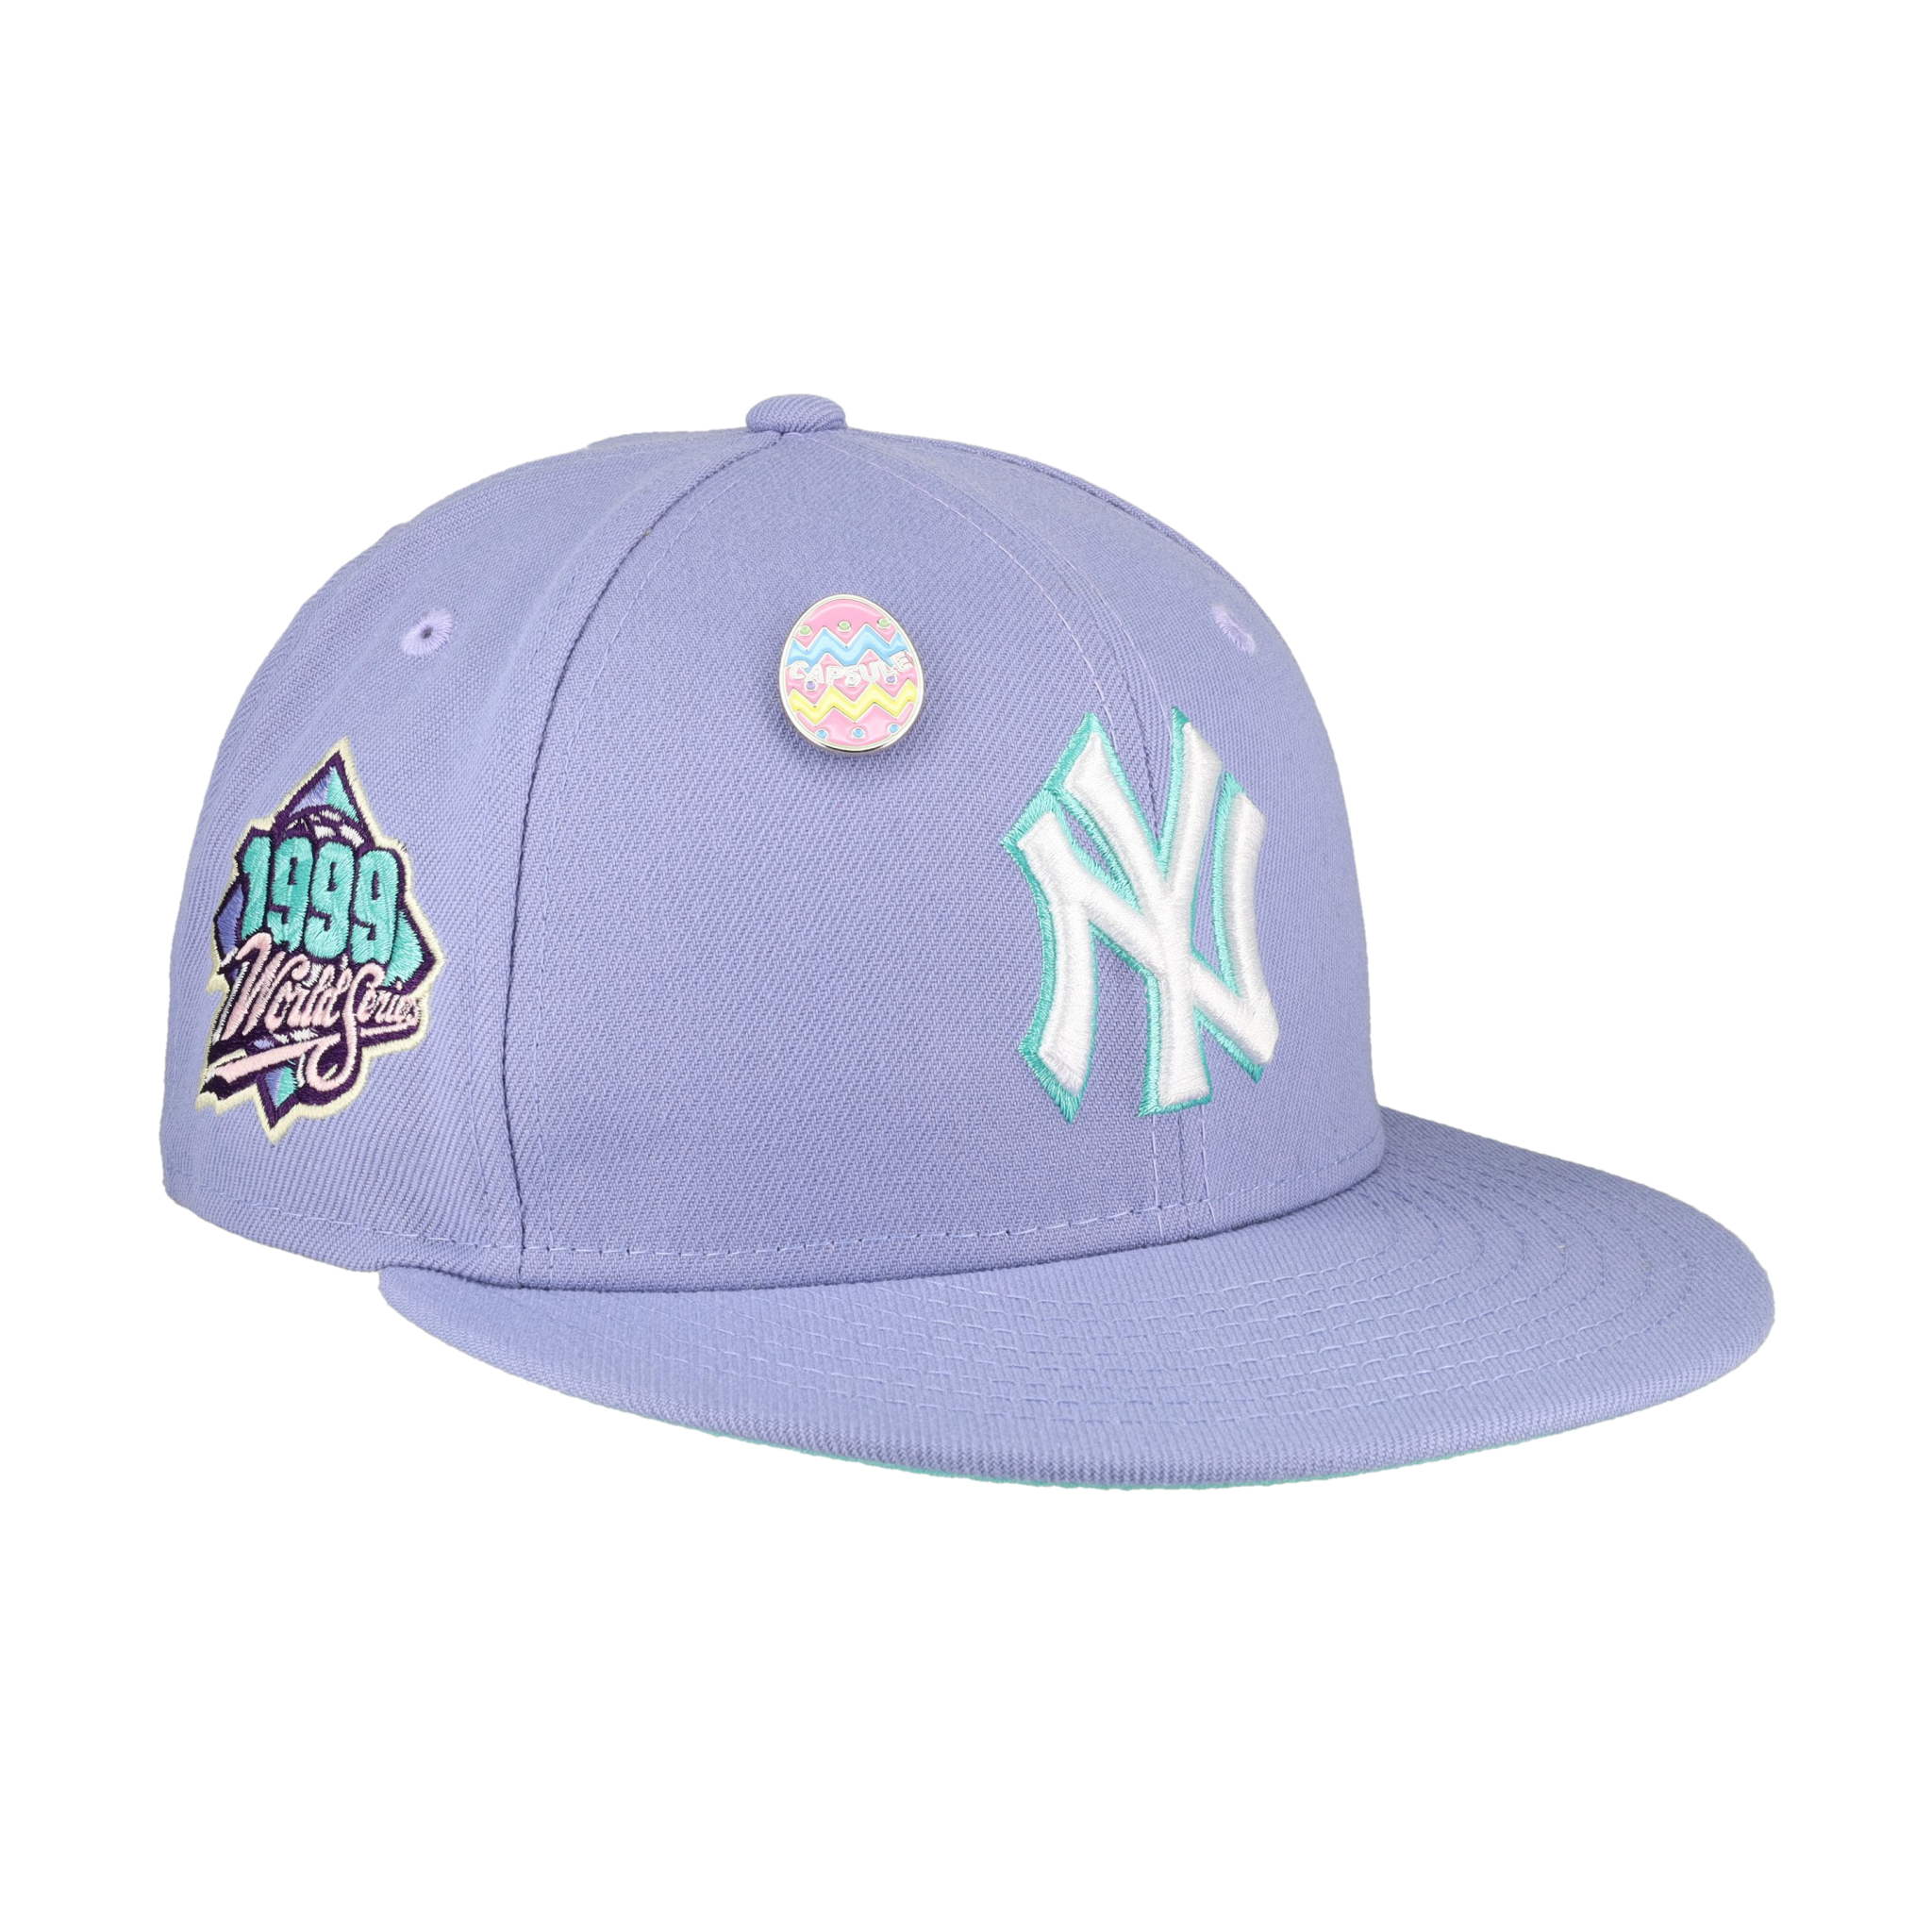 New Era St Louis Cardinals 59fifty - Easter Pack Size 7 5/8 Fitted